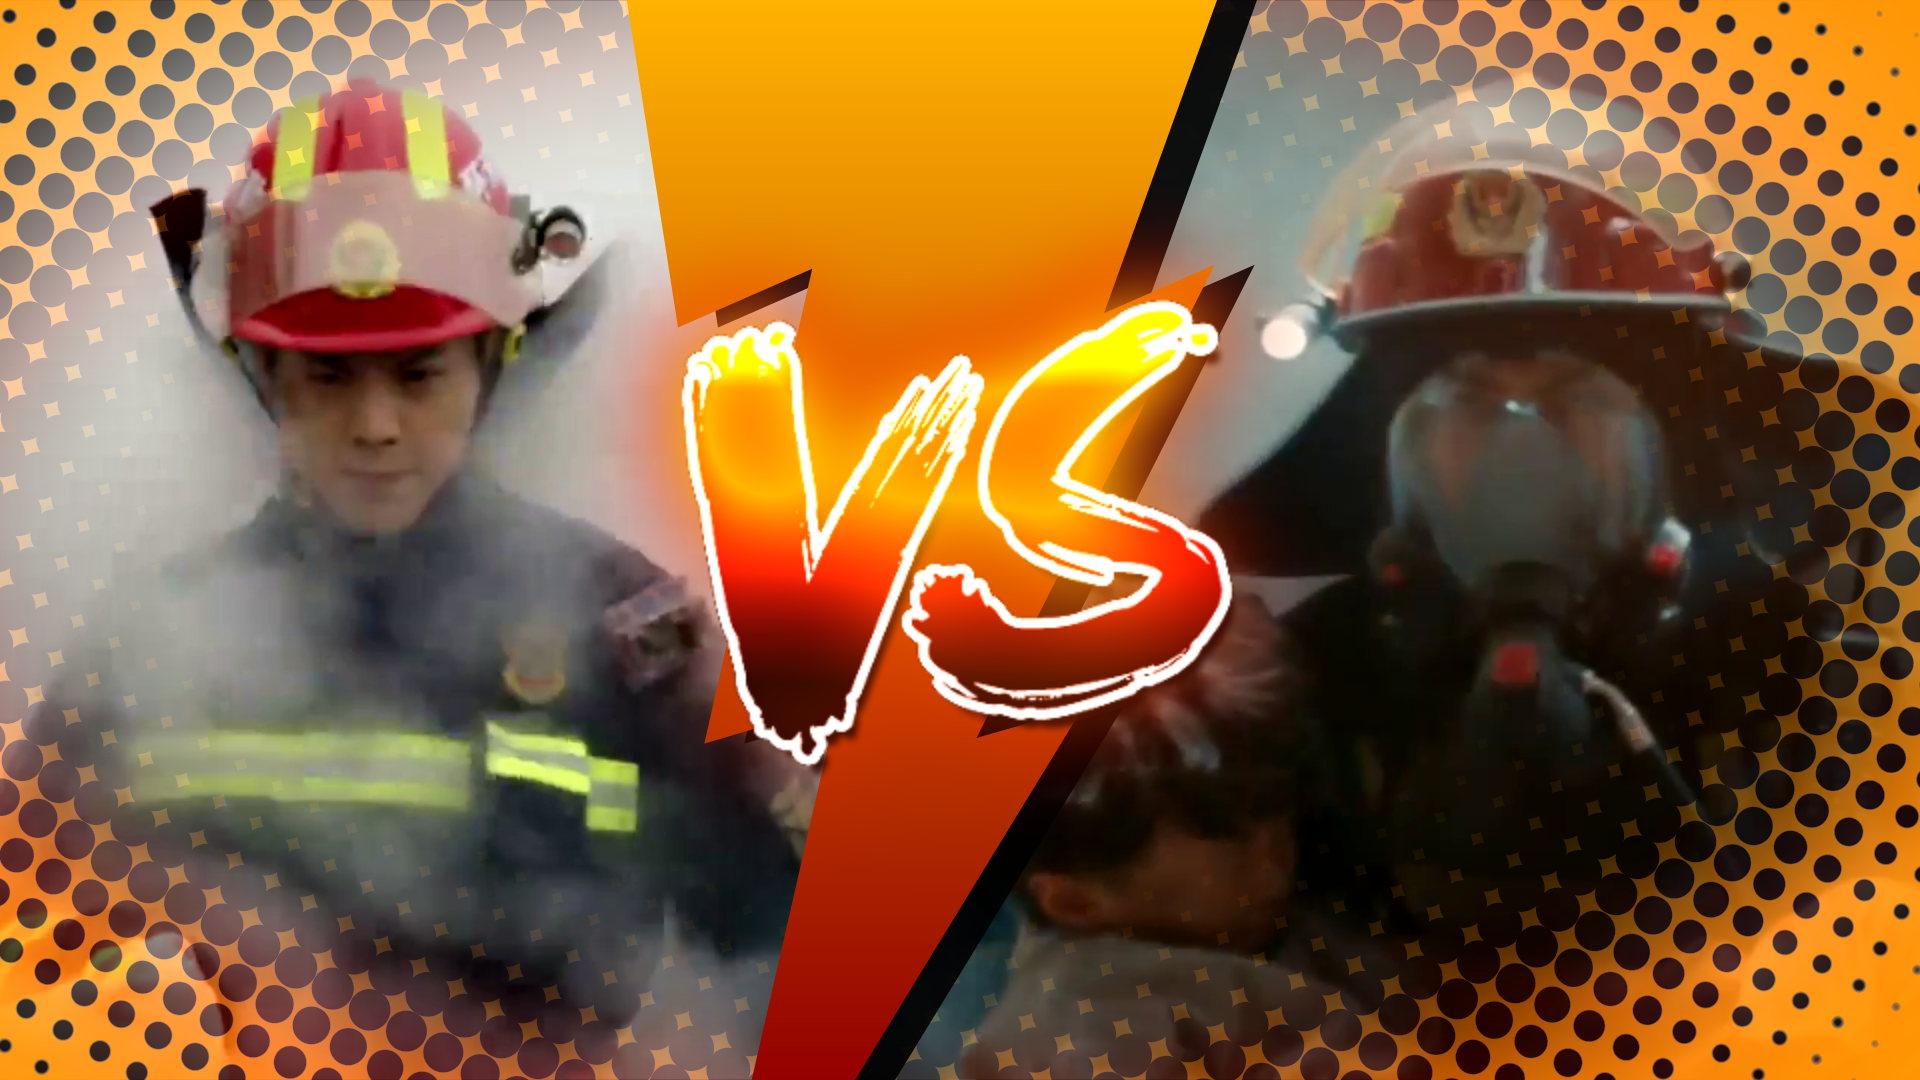 An important competition between dueling Chinese firemen shows A Date with the Future and Fireworks of My Heart